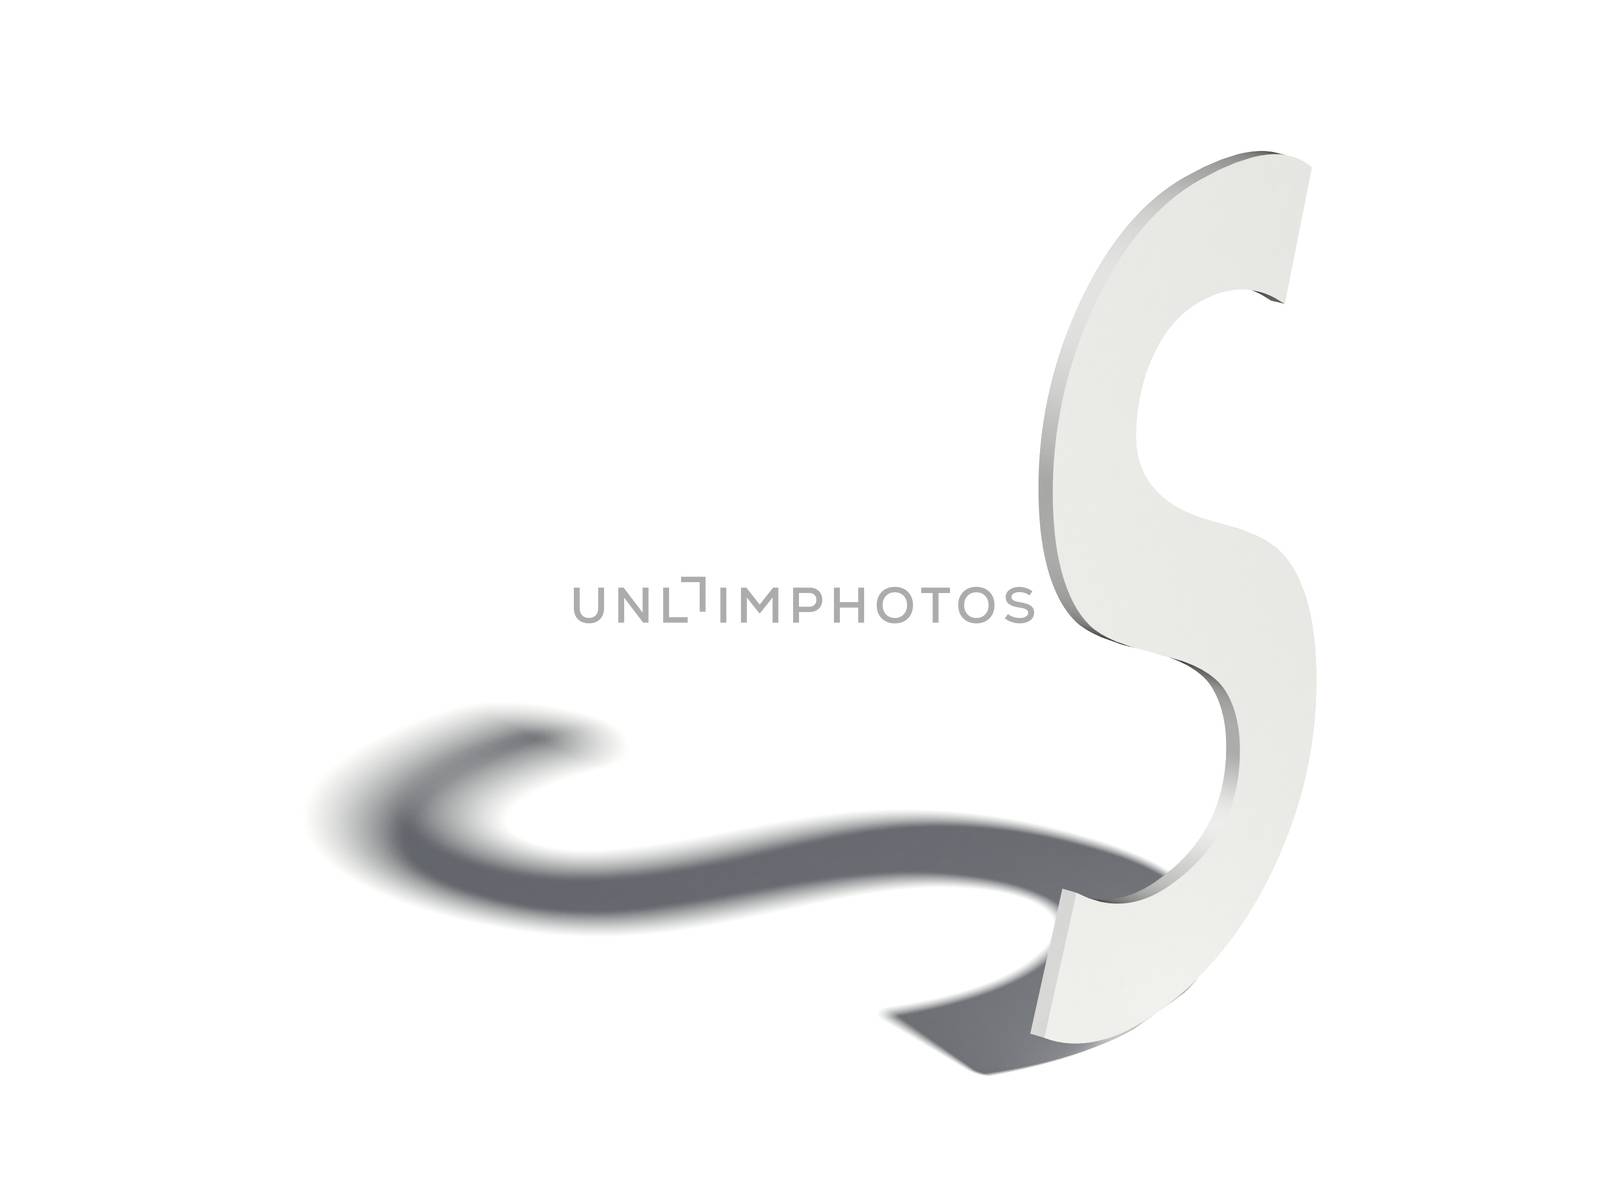 Drop shadow font. Letter S. 3D render illustration isolated on white background